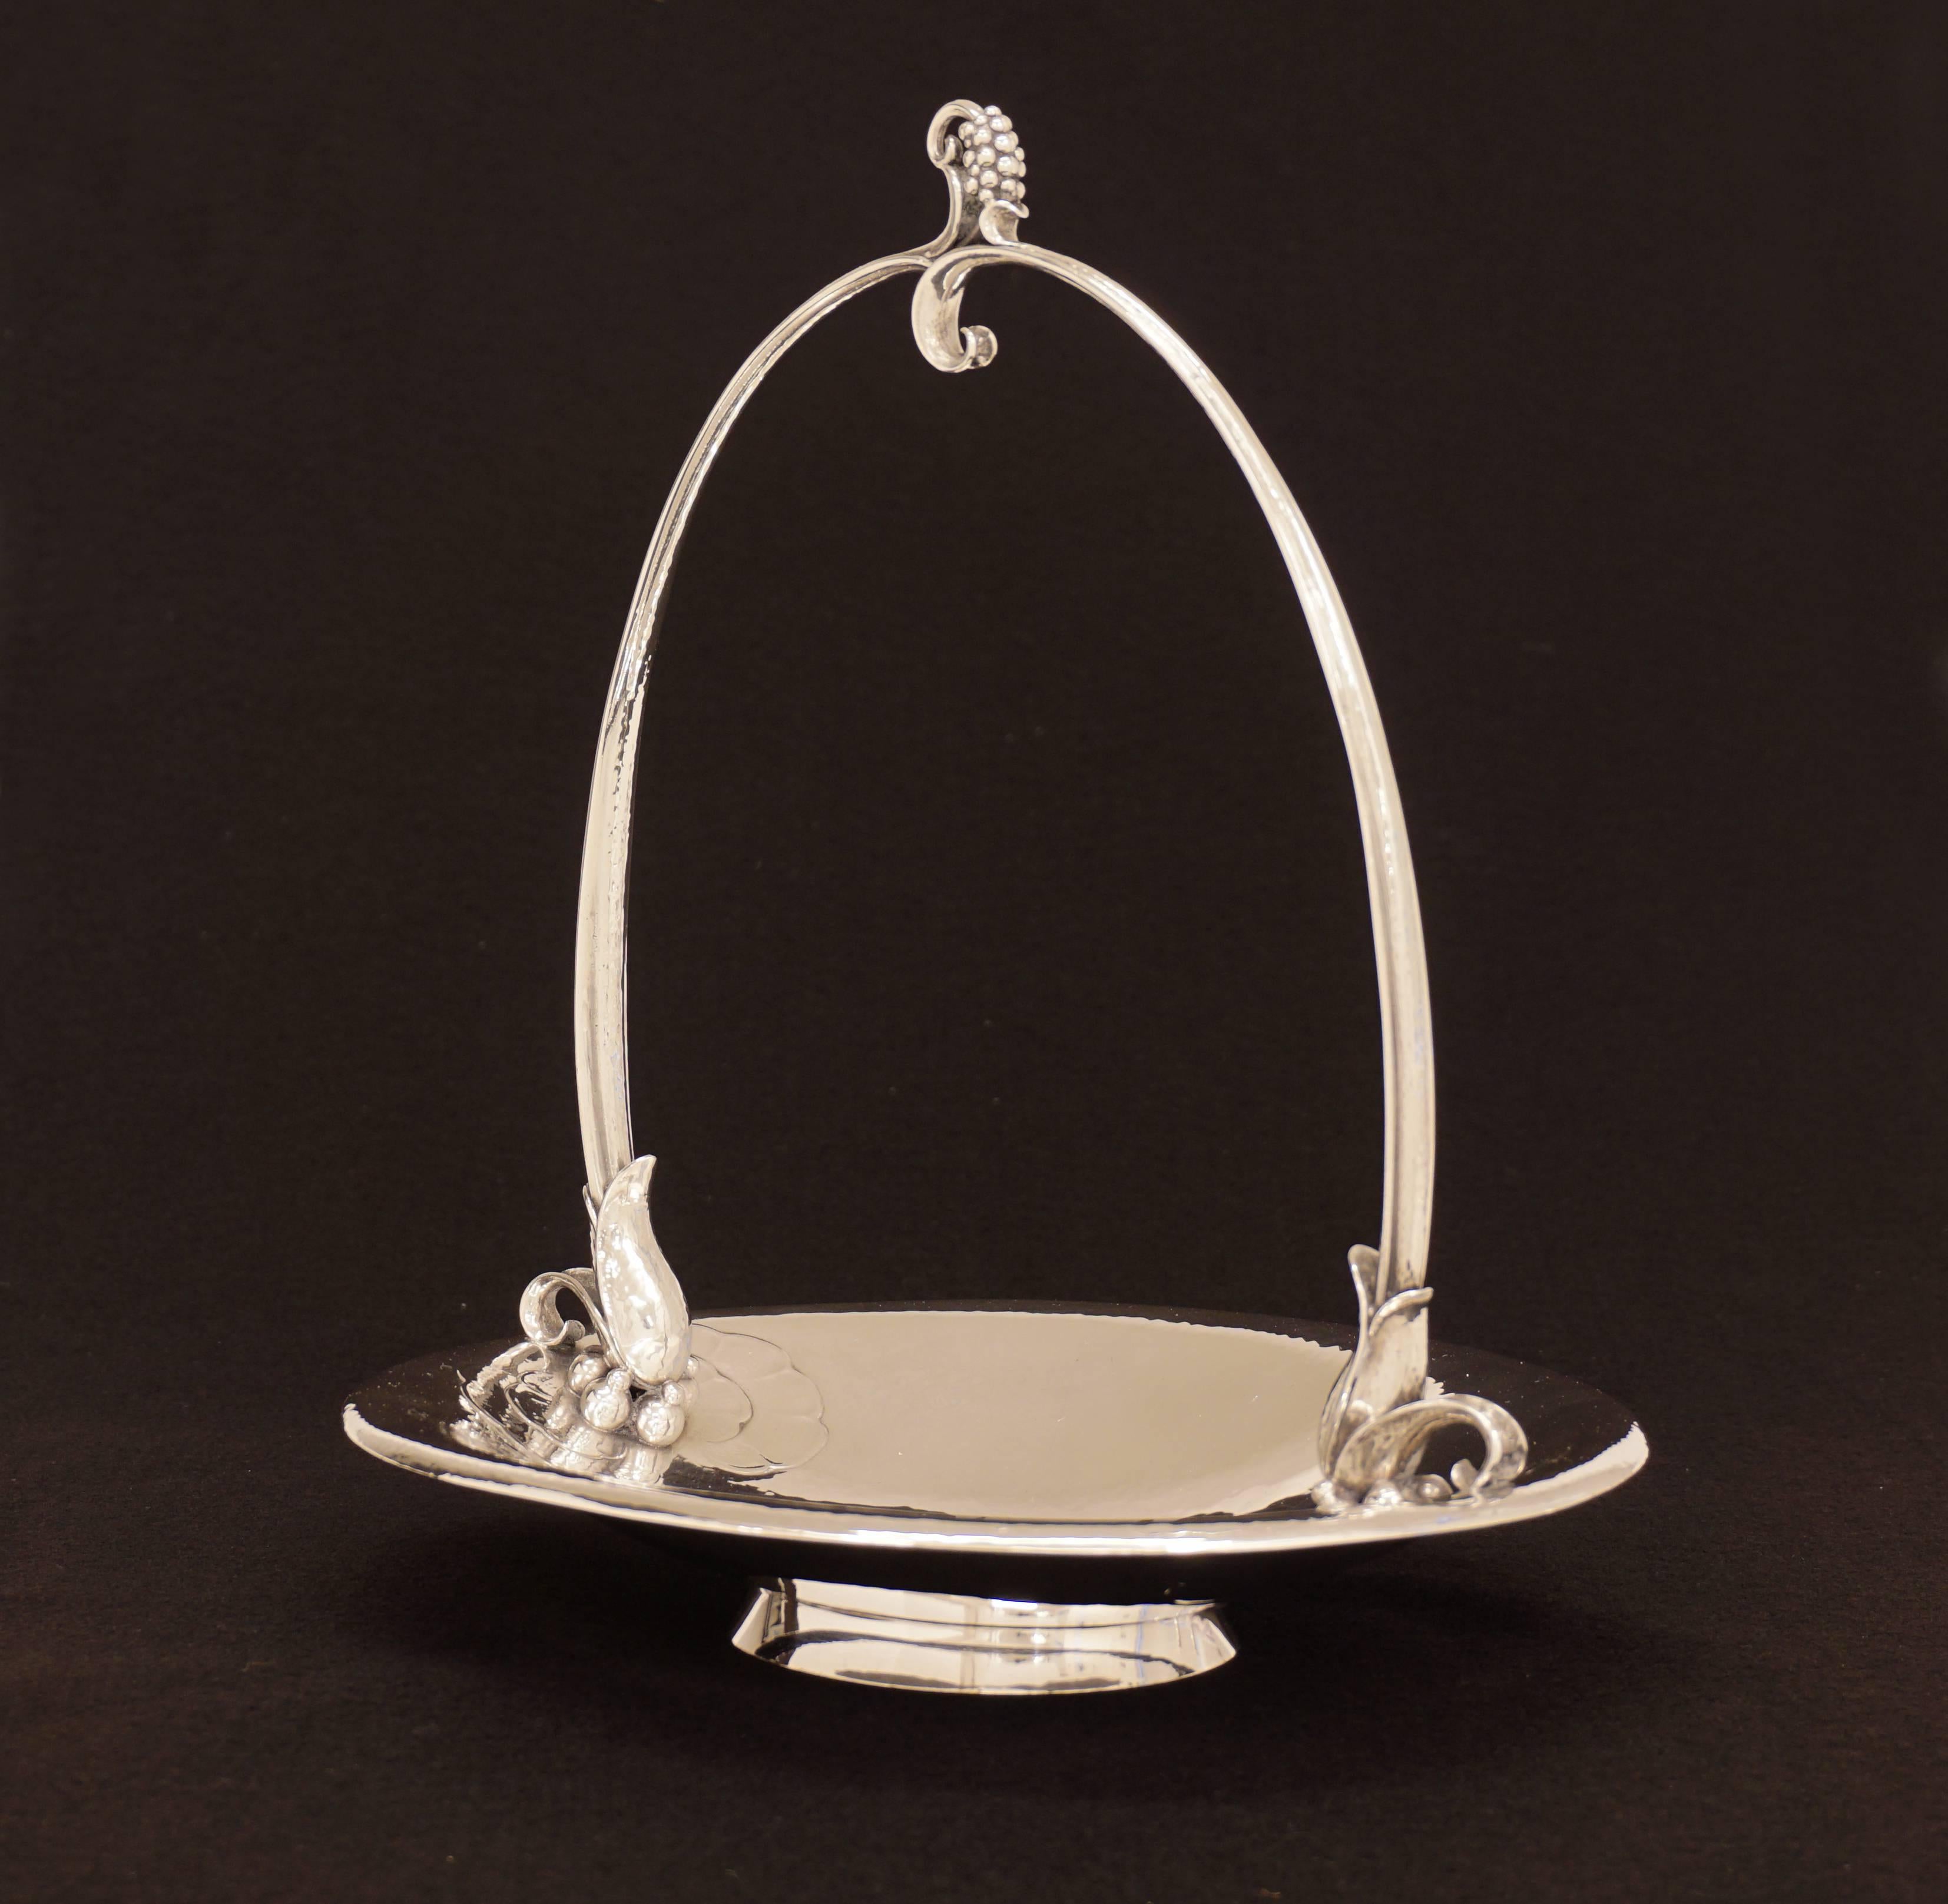 Harald Nielsen for Georg Jensen, grape stand designed 1929. Sterling. Design #543. When grapes are clipped they will fall into the basket. Made by Georg Jensen, 2011.